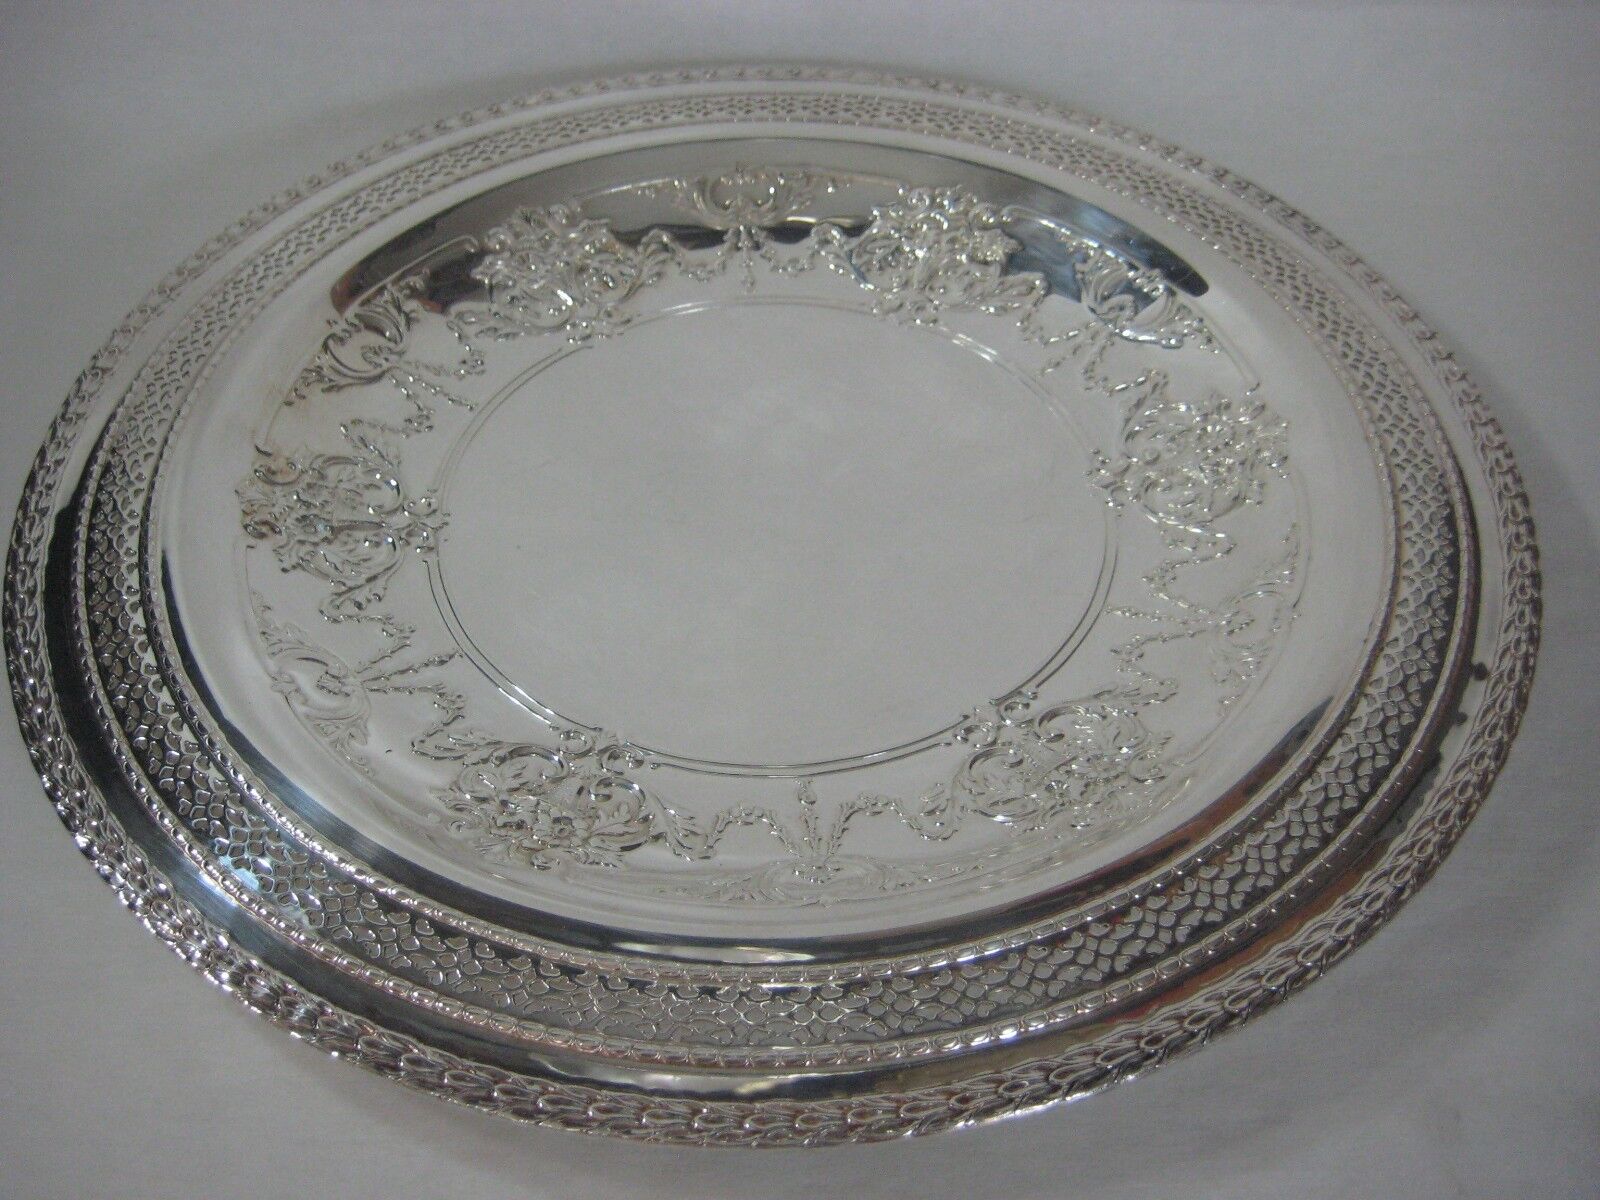 OLD INTERNATIONAL SILVER COMPANY I S 167 LACE DESIGN EDGES SERVING PLATTER TRAY